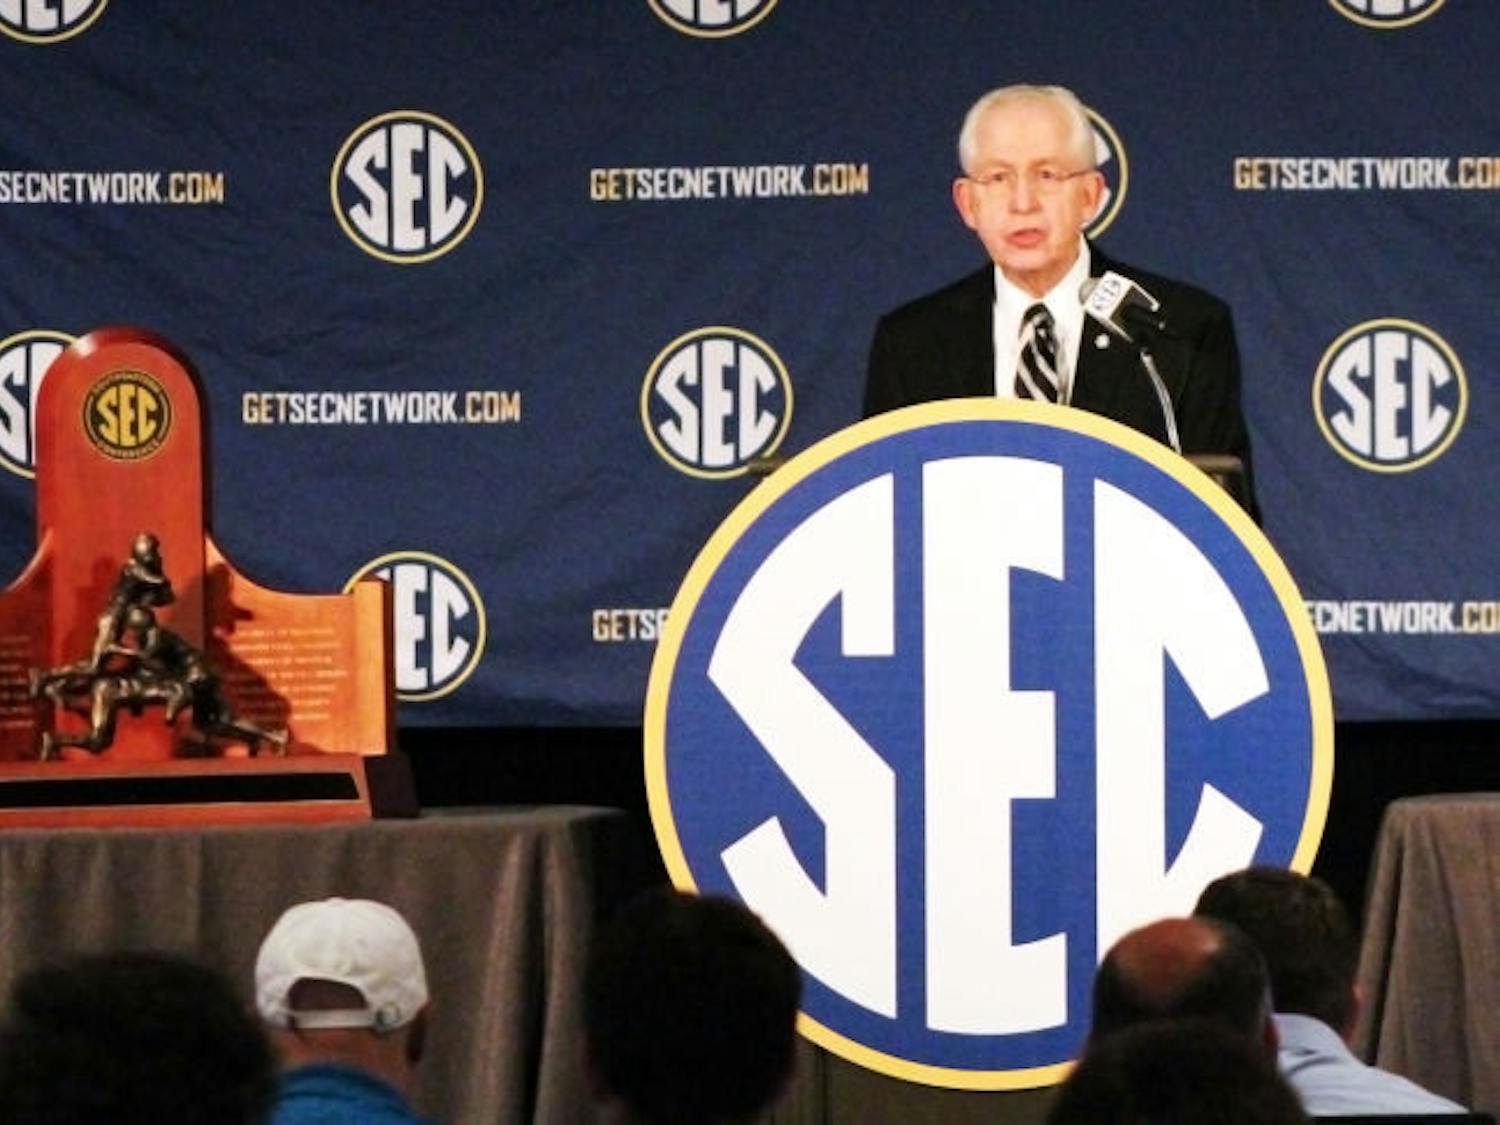 Southeastern Conference comissioner Mike Slive give the opening speech of the SEC Media Days on Monday in Hoover, Ala.